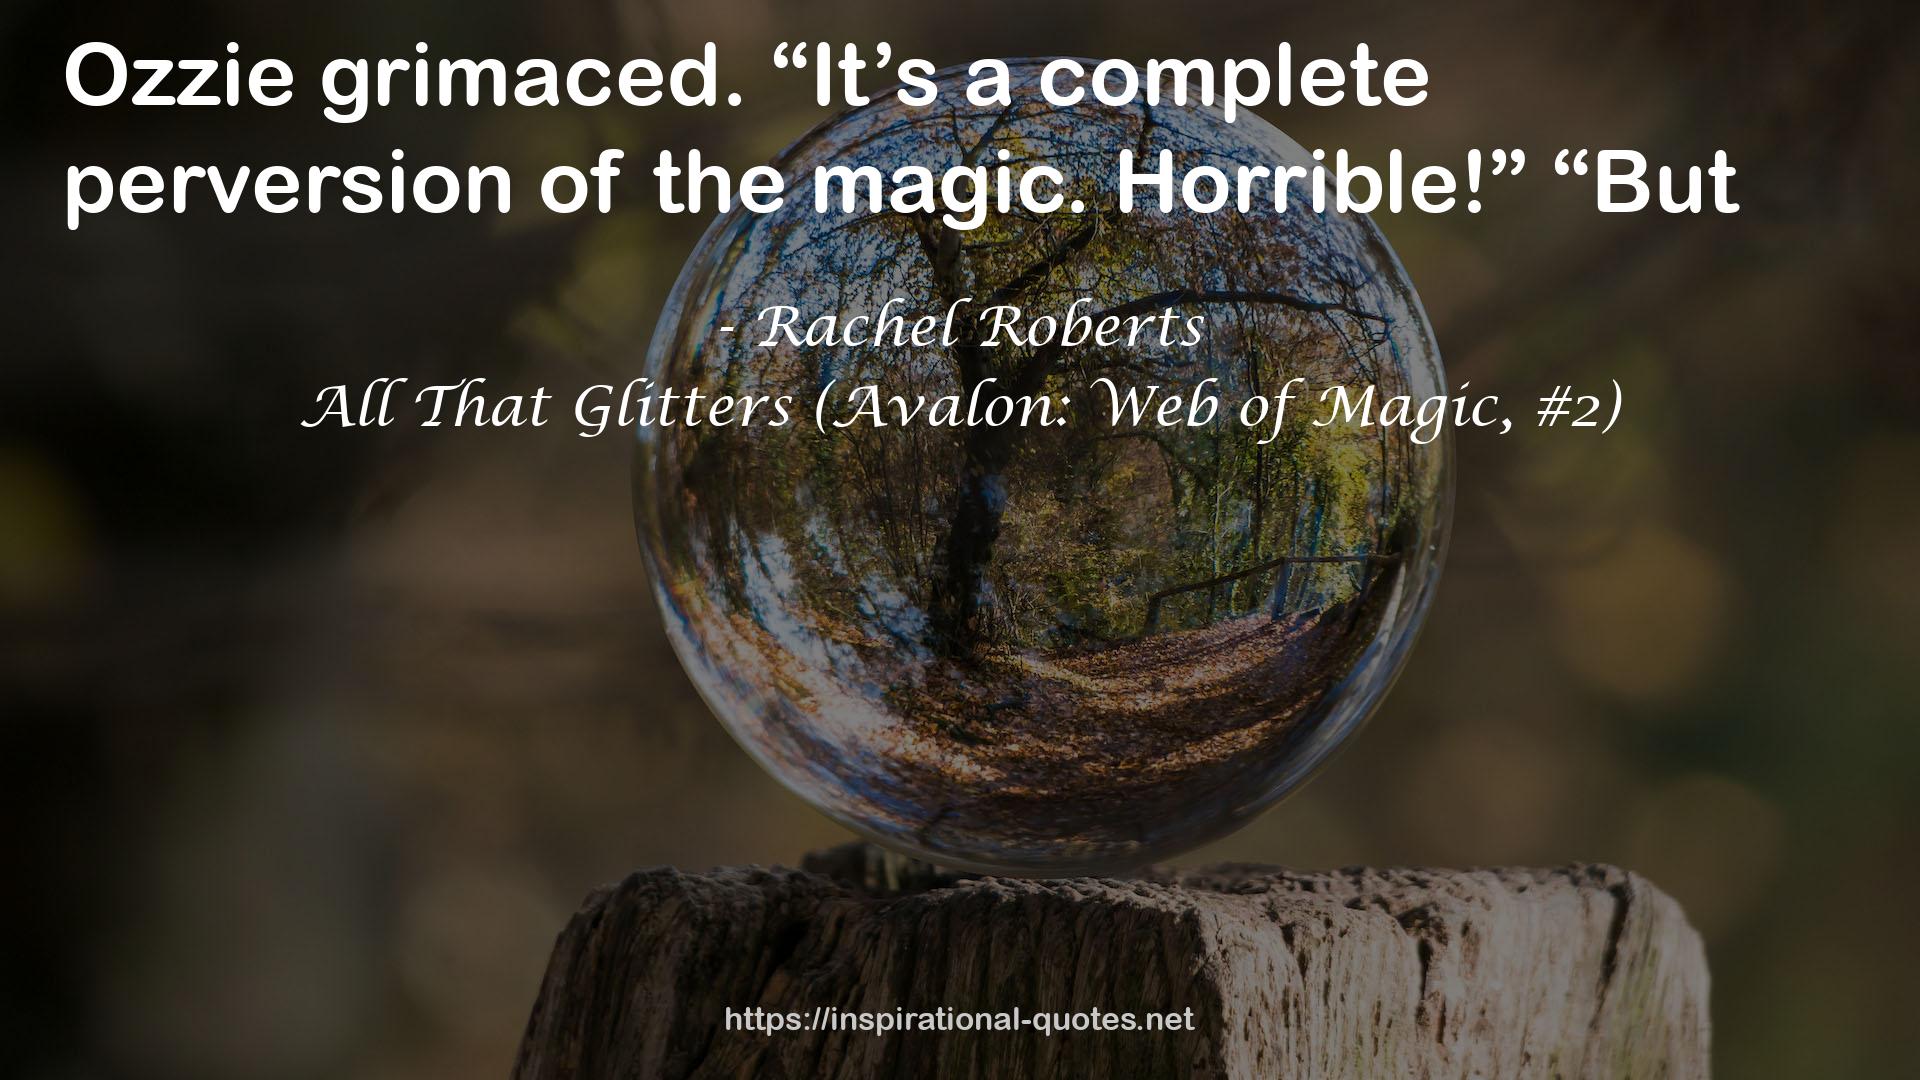 All That Glitters (Avalon: Web of Magic, #2) QUOTES